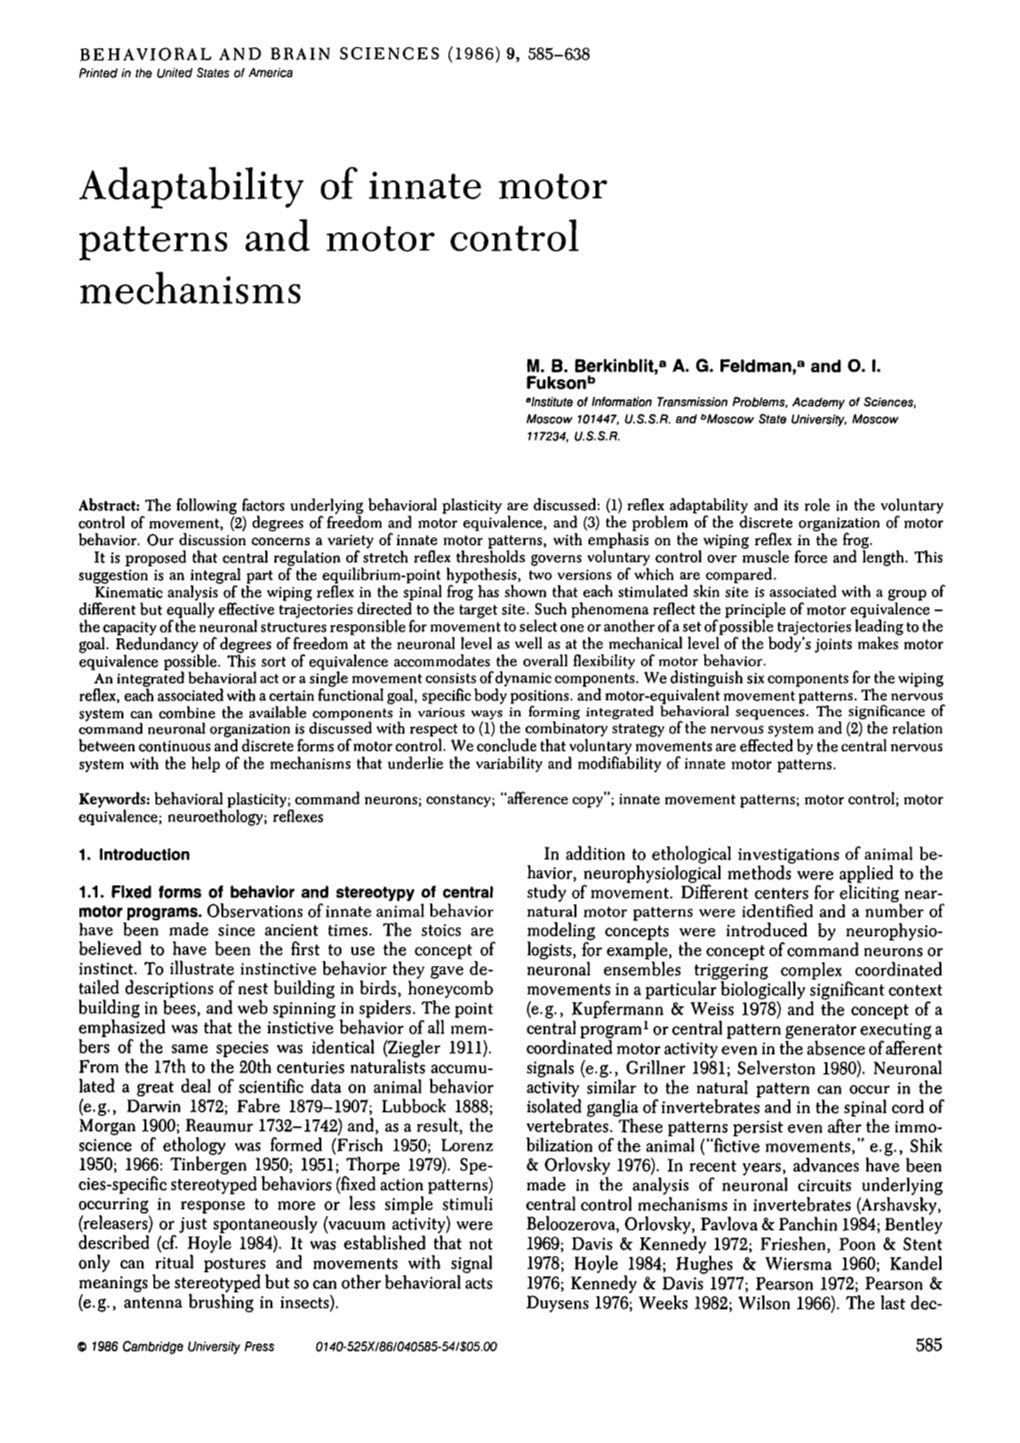 Adaptability of Innate Motor Patterns and Motor Control Mechanisms